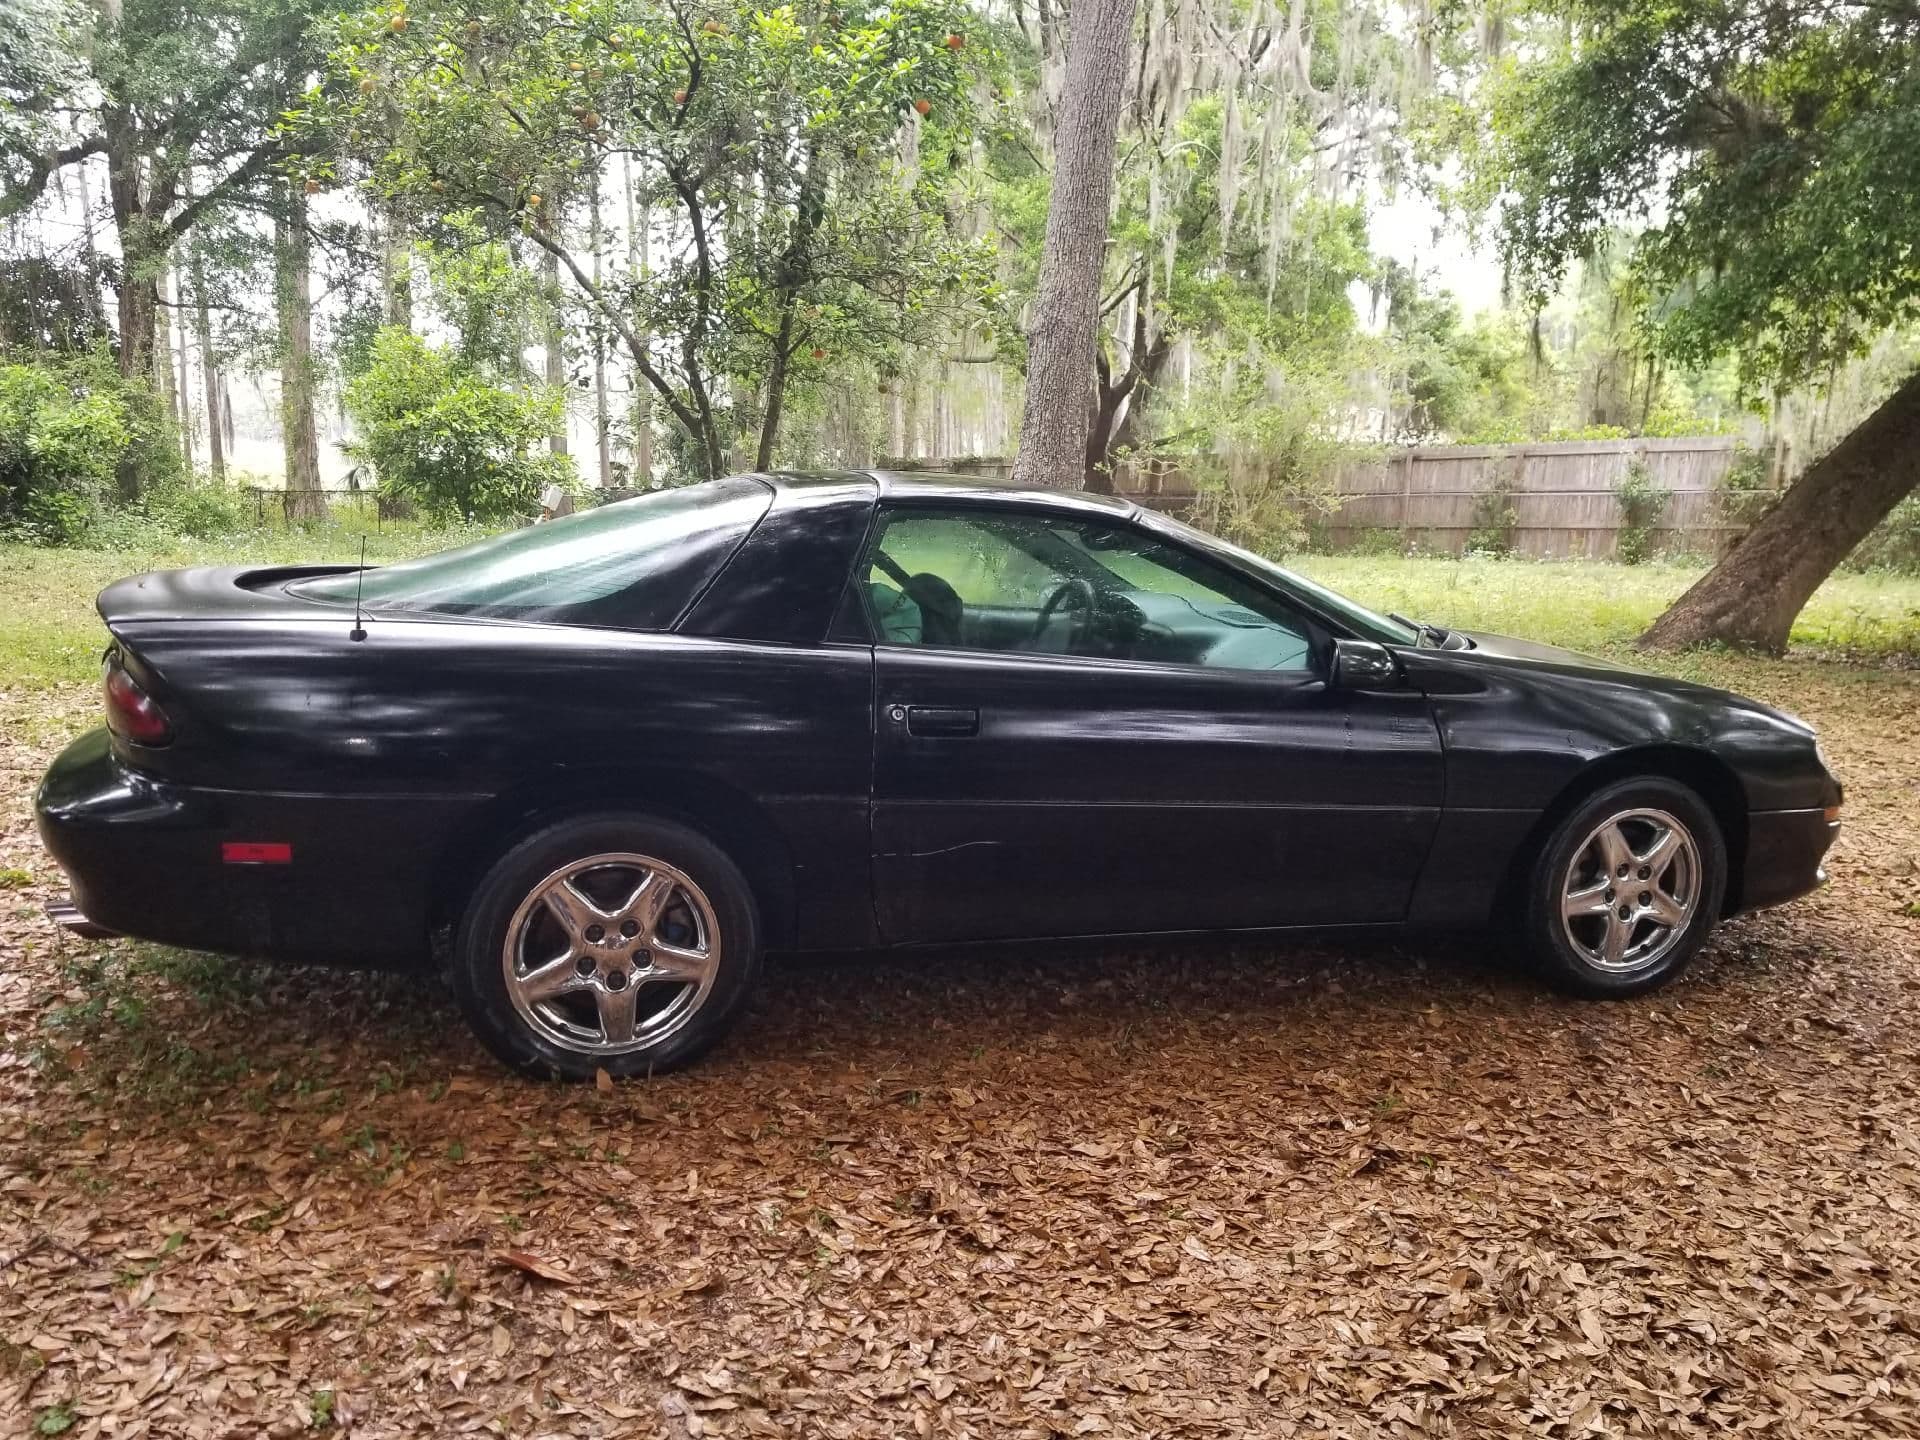 1999 Chevrolet Camaro - 99 z28 - Used - VIN 2G1FP22G4X2112877 - 113,000 Miles - 8 cyl - 2WD - Automatic - Coupe - Black - Hernando, FL 34442, United States